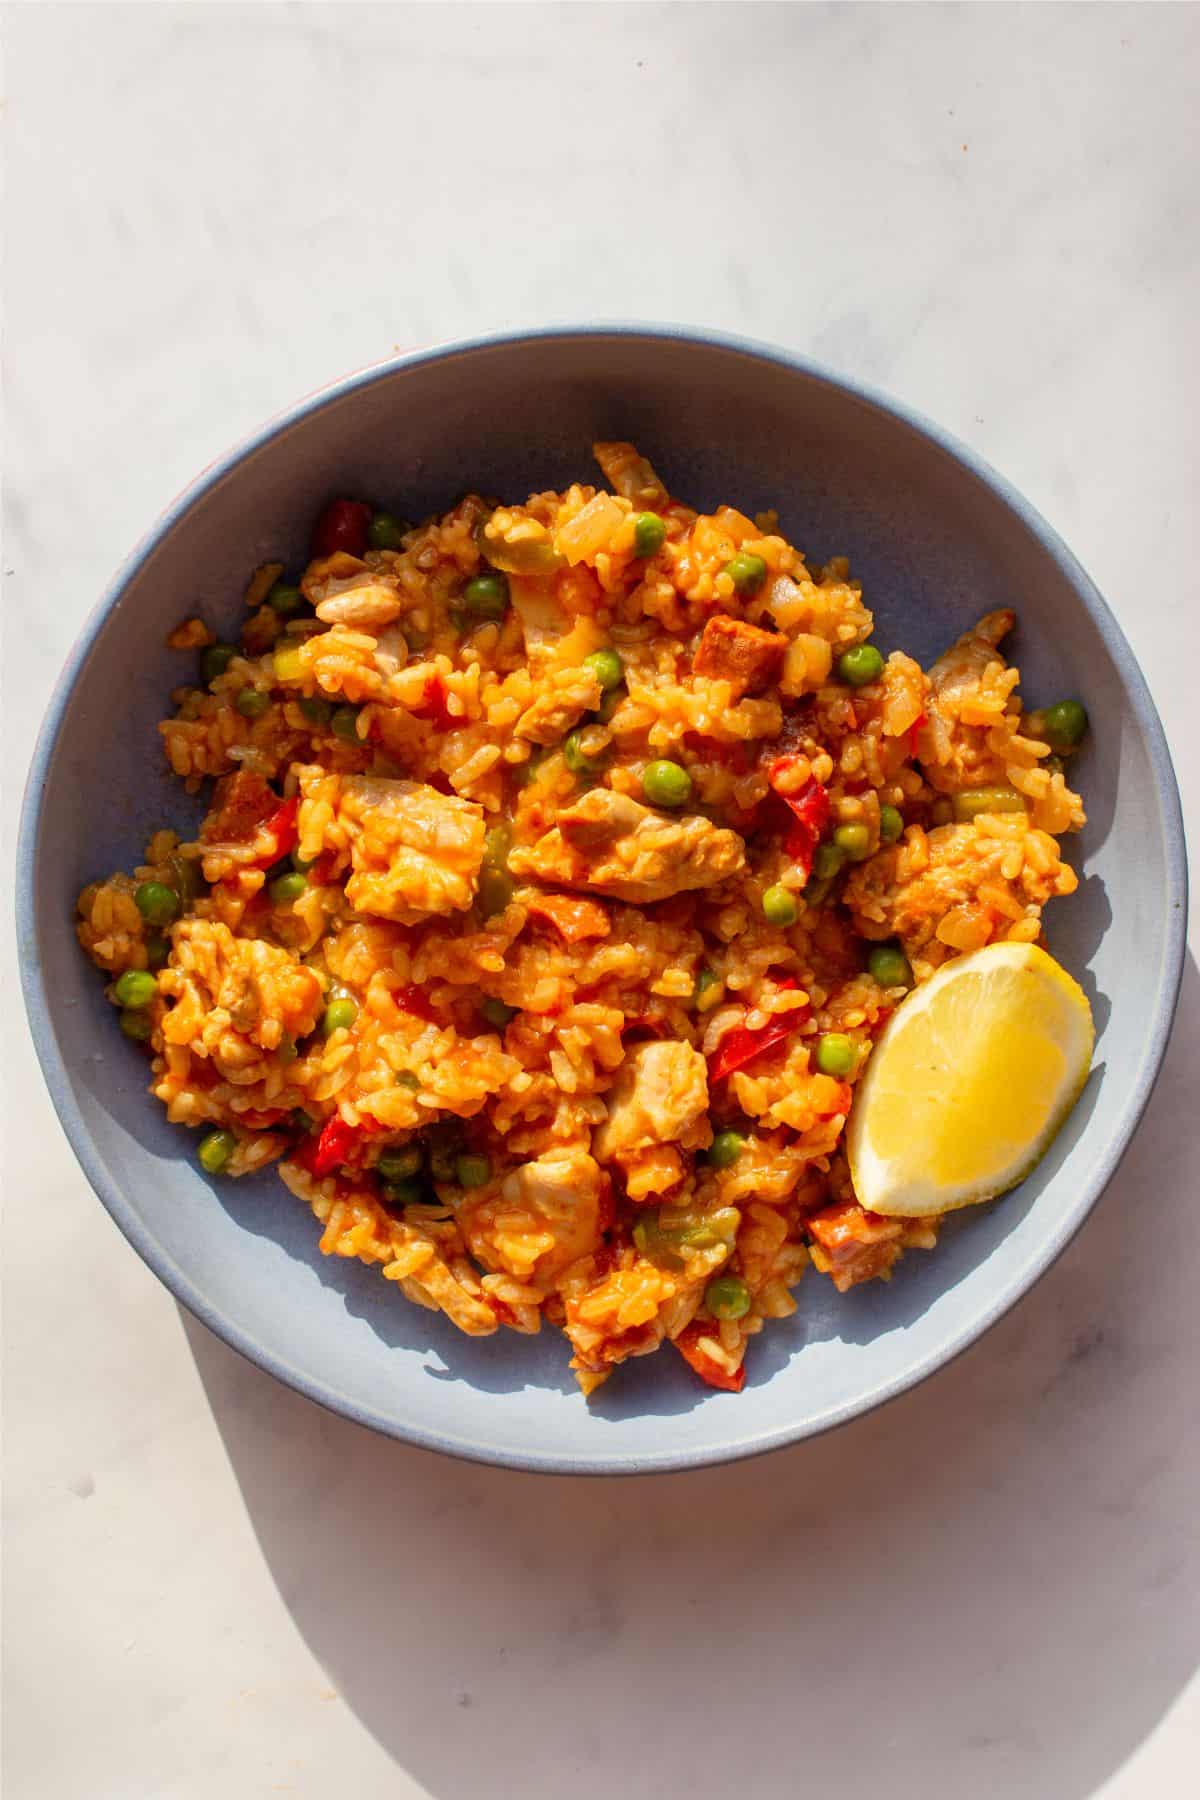 Paella rice with chorizo, chicken, peppers and peas in a bowl with a wedge of lemon.